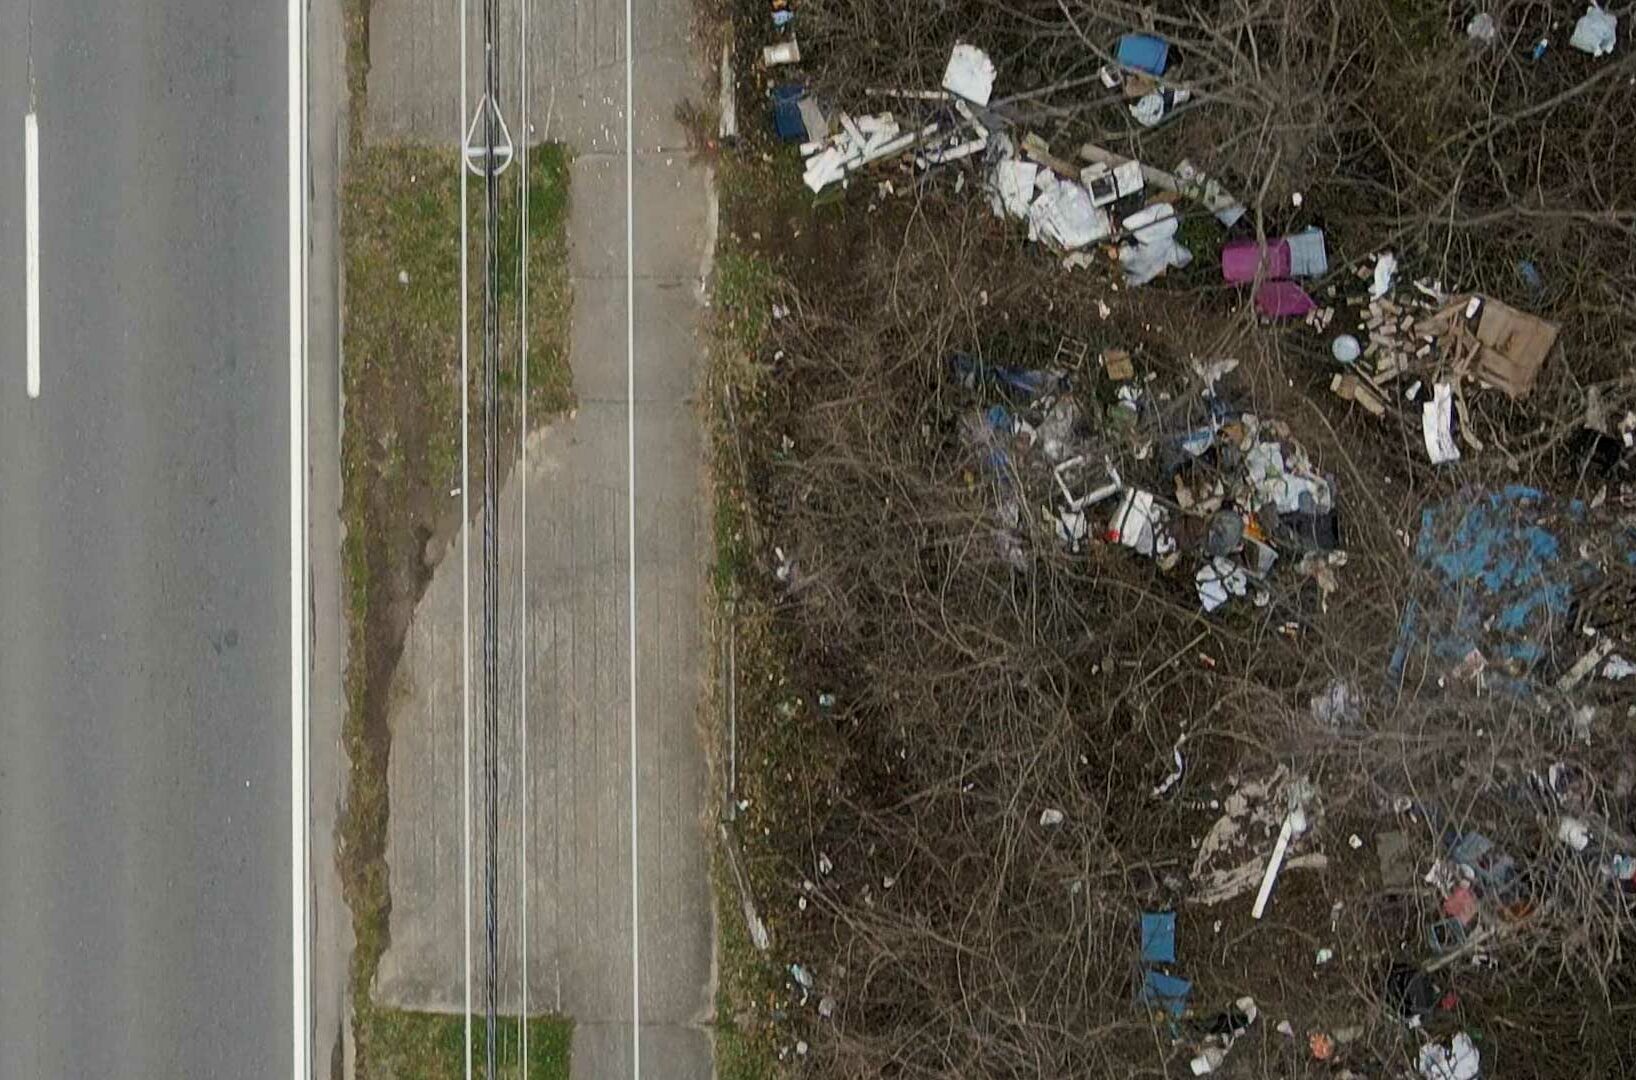 Large amount of litter next to a road.